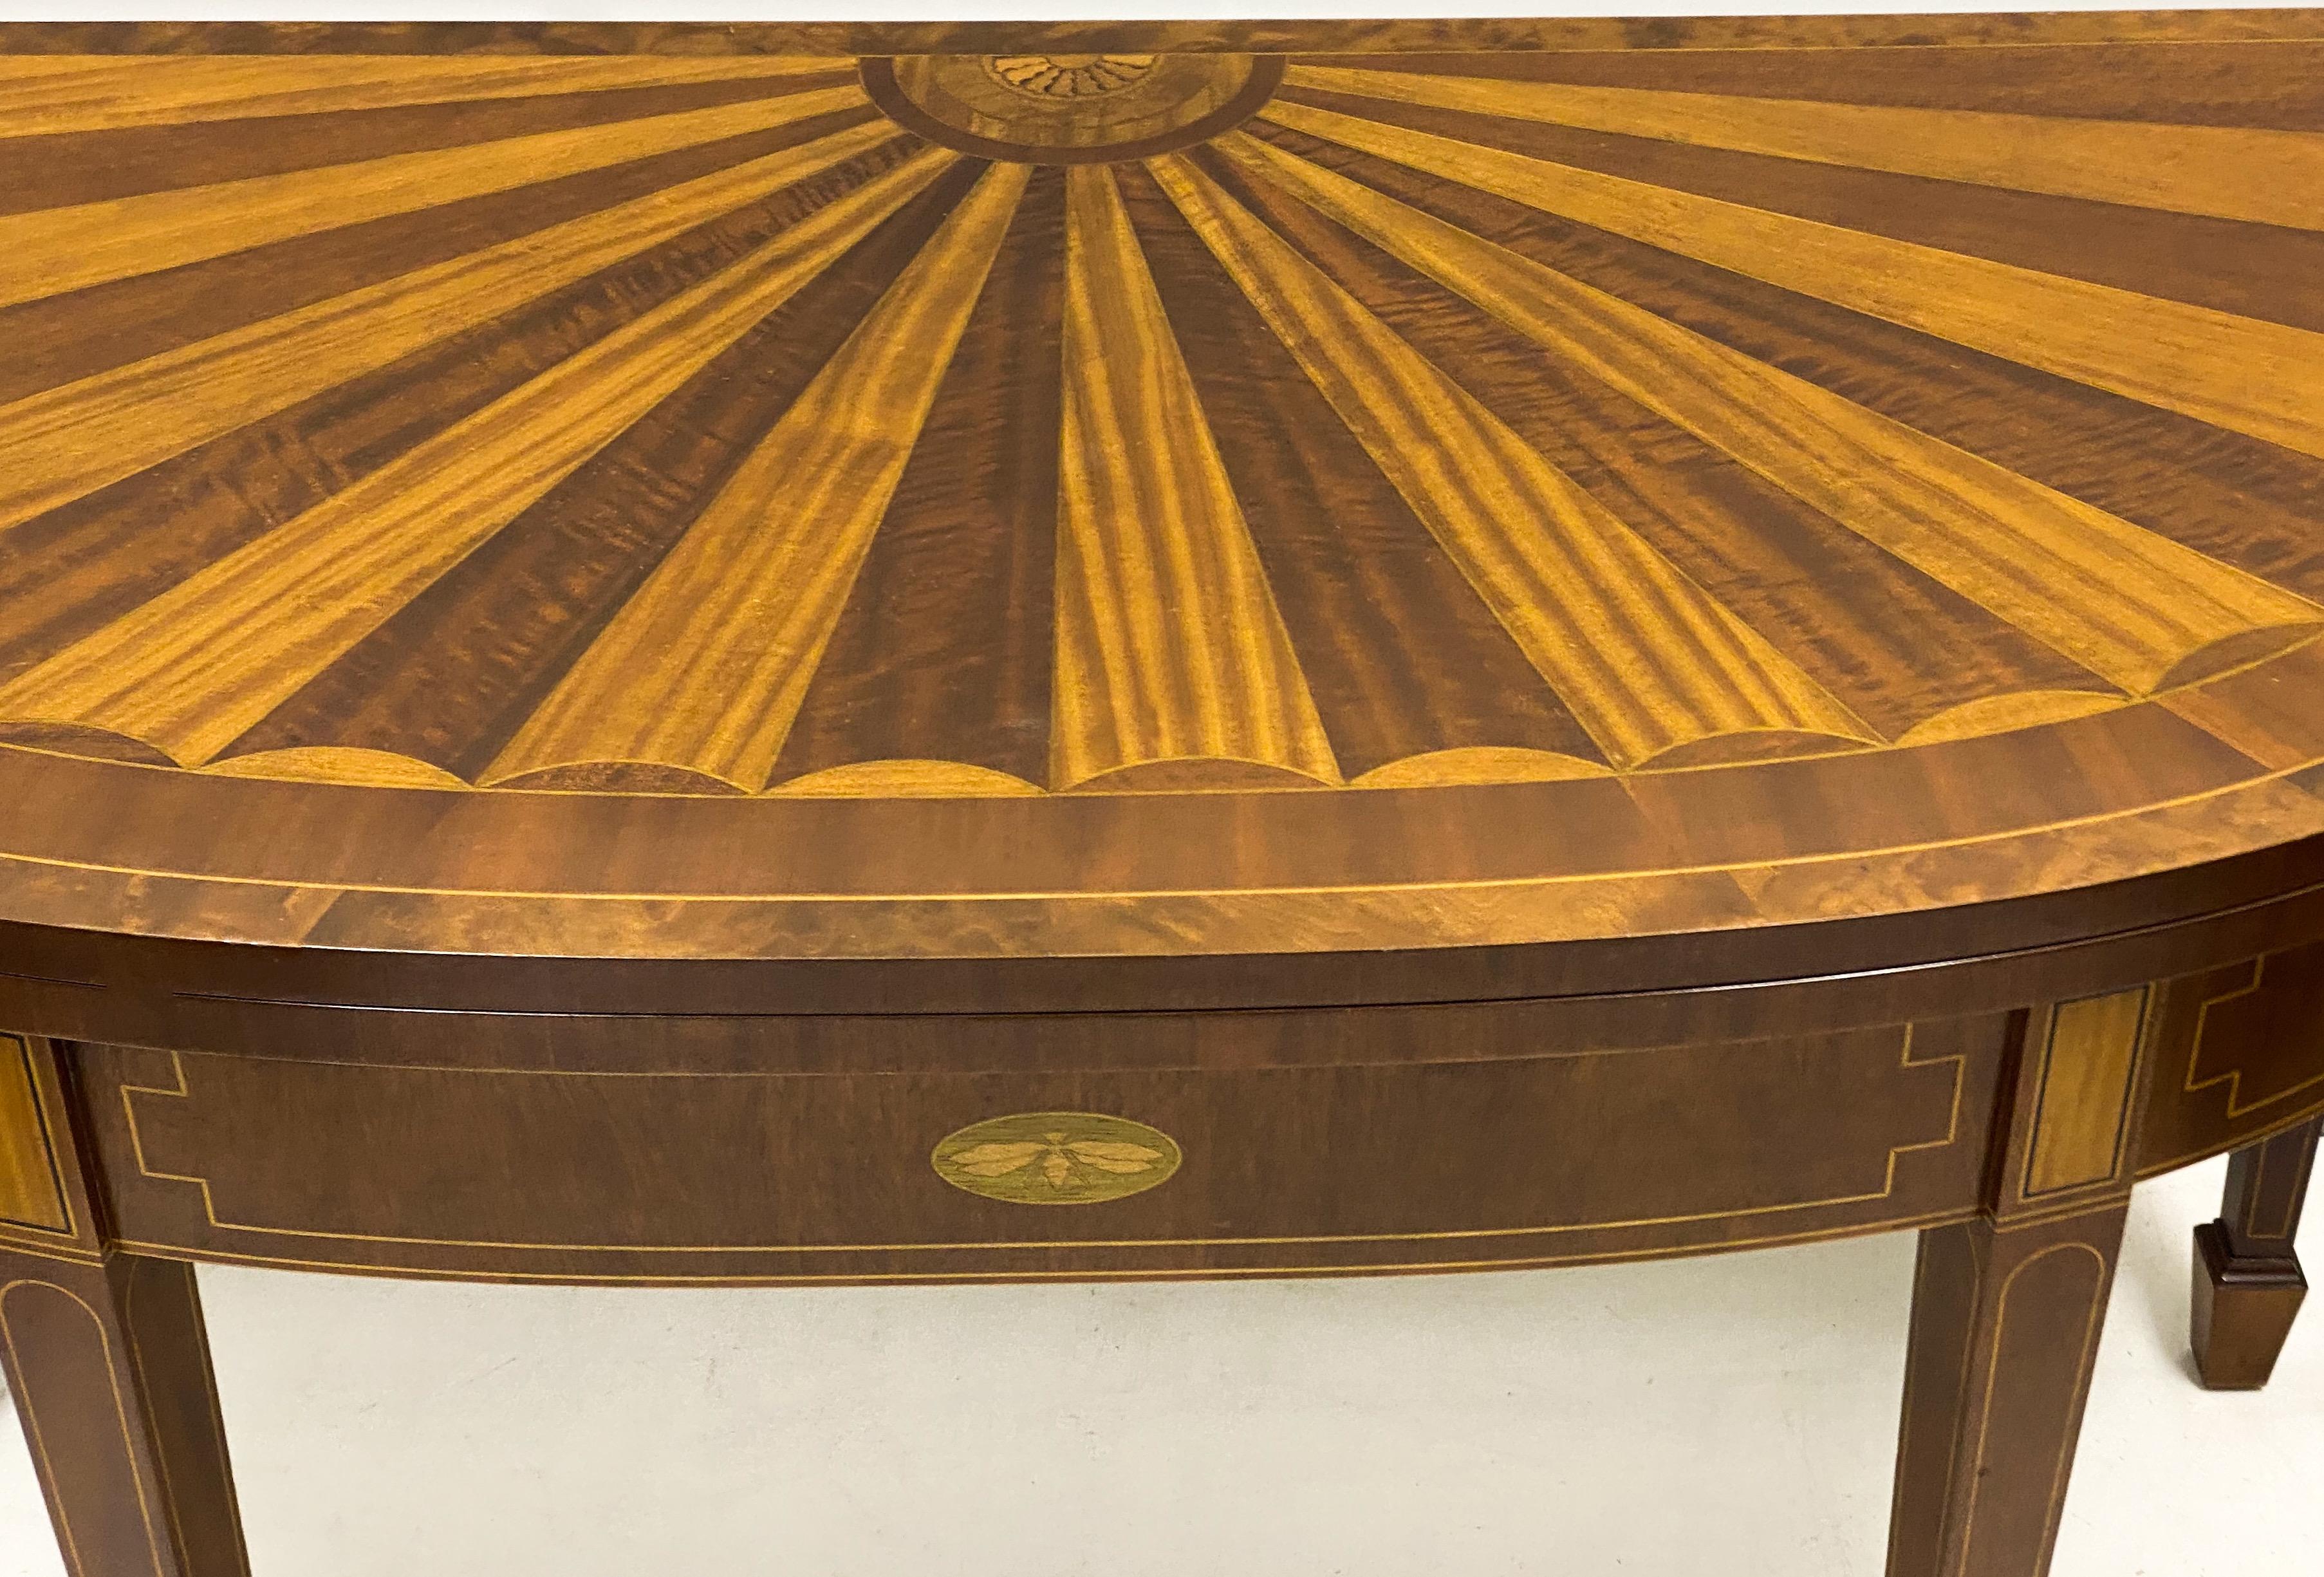 This is a flip top demilune game table with federal styling by Baker Furniture. It is part of their Historic Charleston Collection. The table has two swing support legs, and the green felt is in excellent condition. The inlay is mahogany and